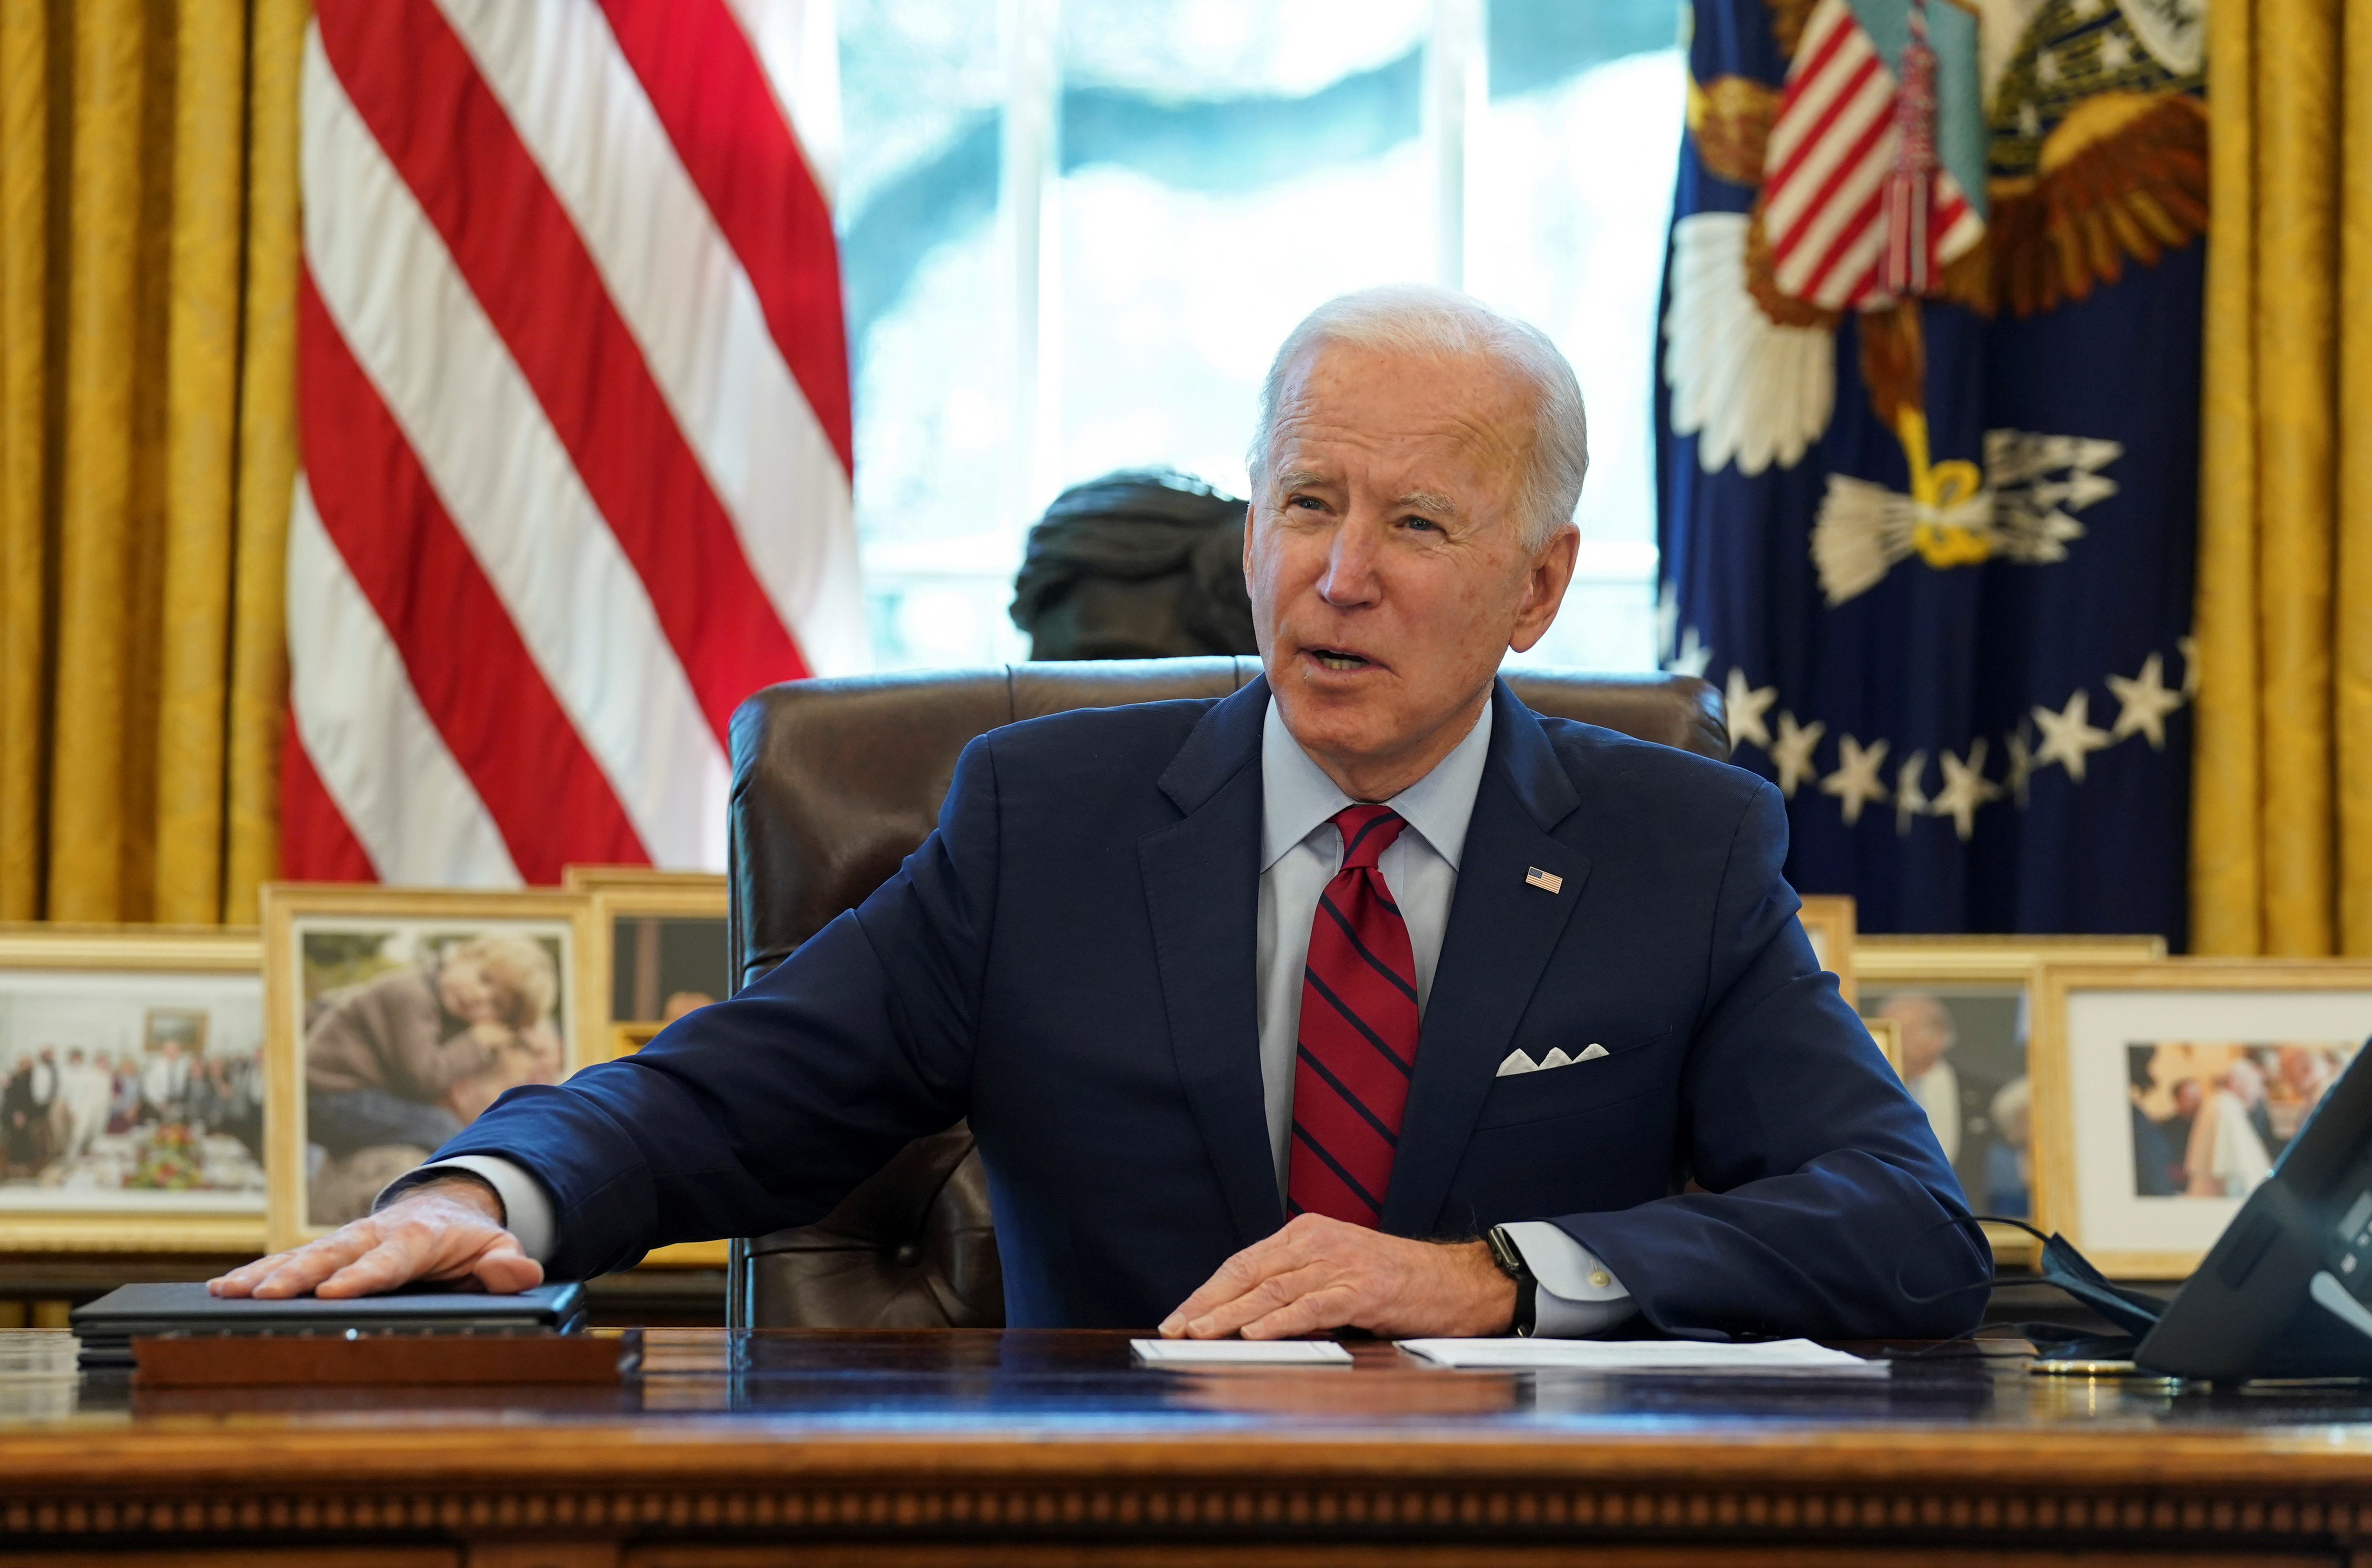 U.S. President Joe Biden speaks before signing executive orders strengthening access to affordable healthcare at the White House in Washington, U.S., January 28, 2021. REUTERS/Kevin Lamarque/File Photo